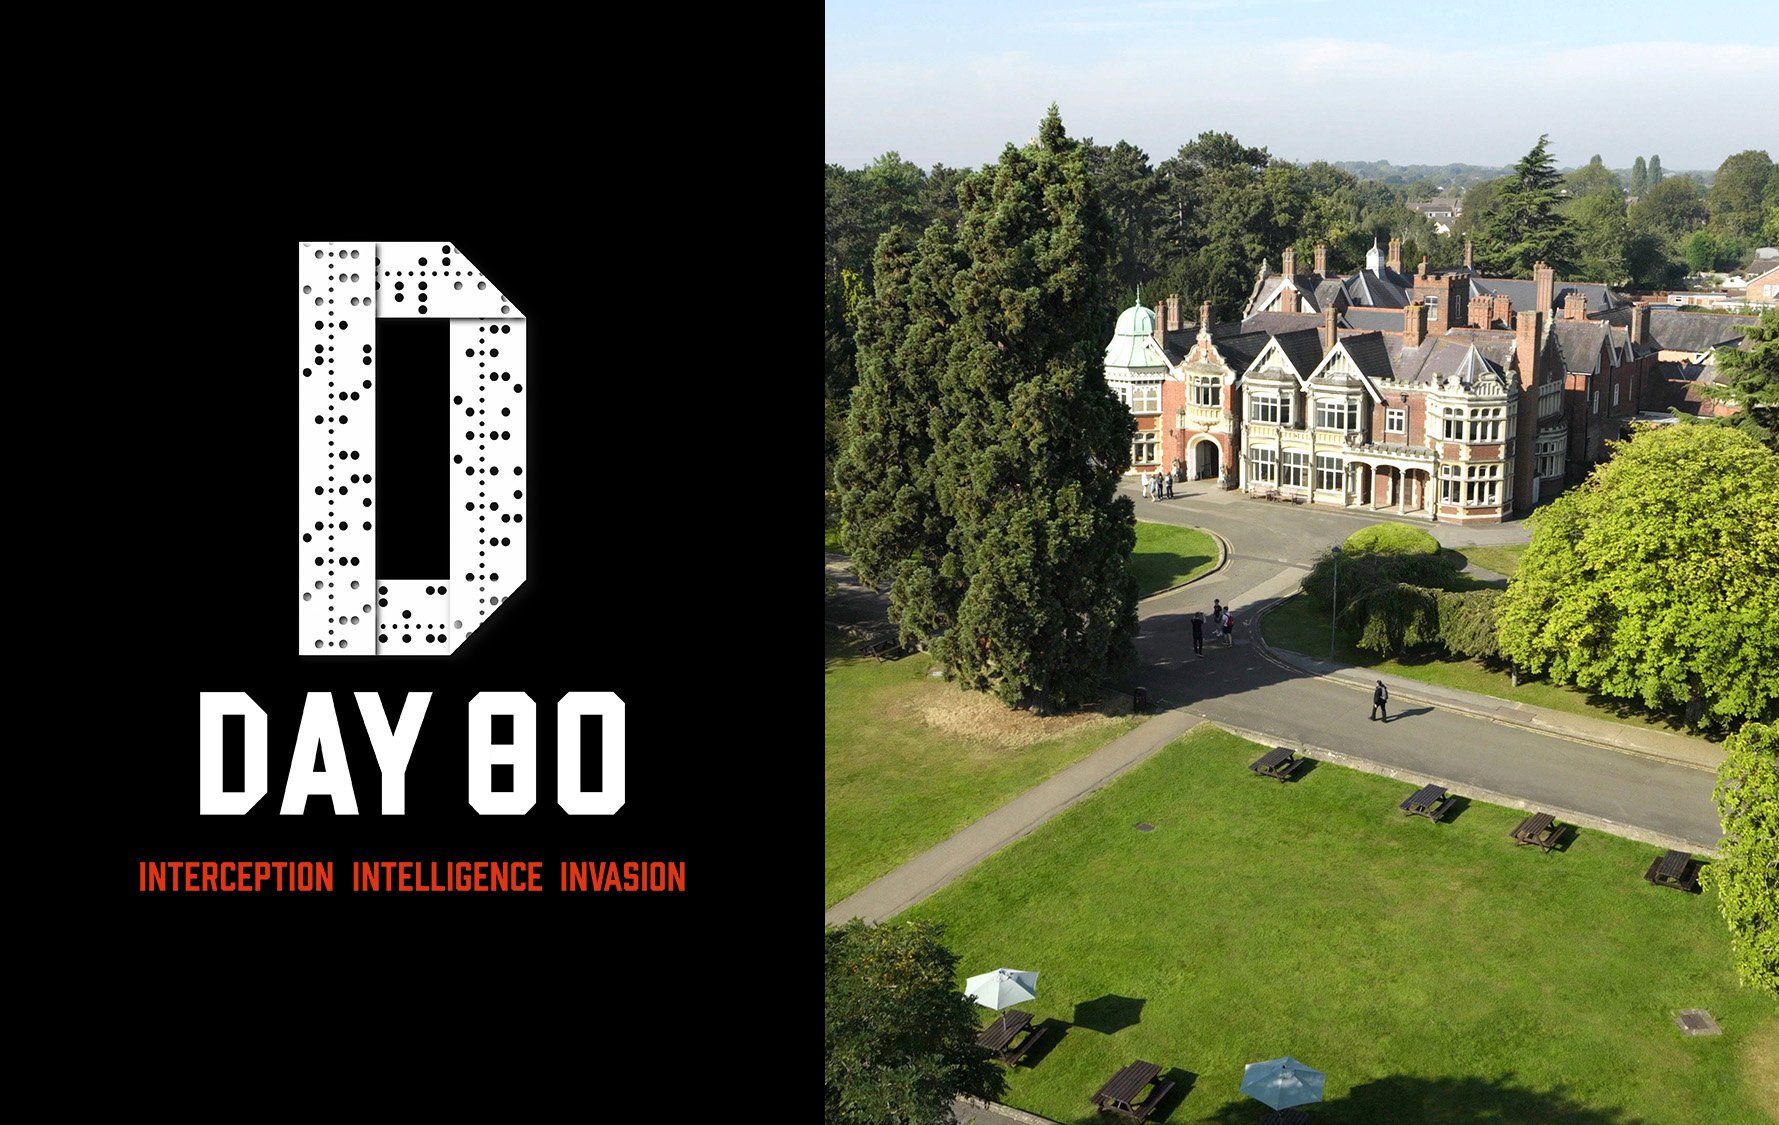 D-Day 80 at Bletchley Park.